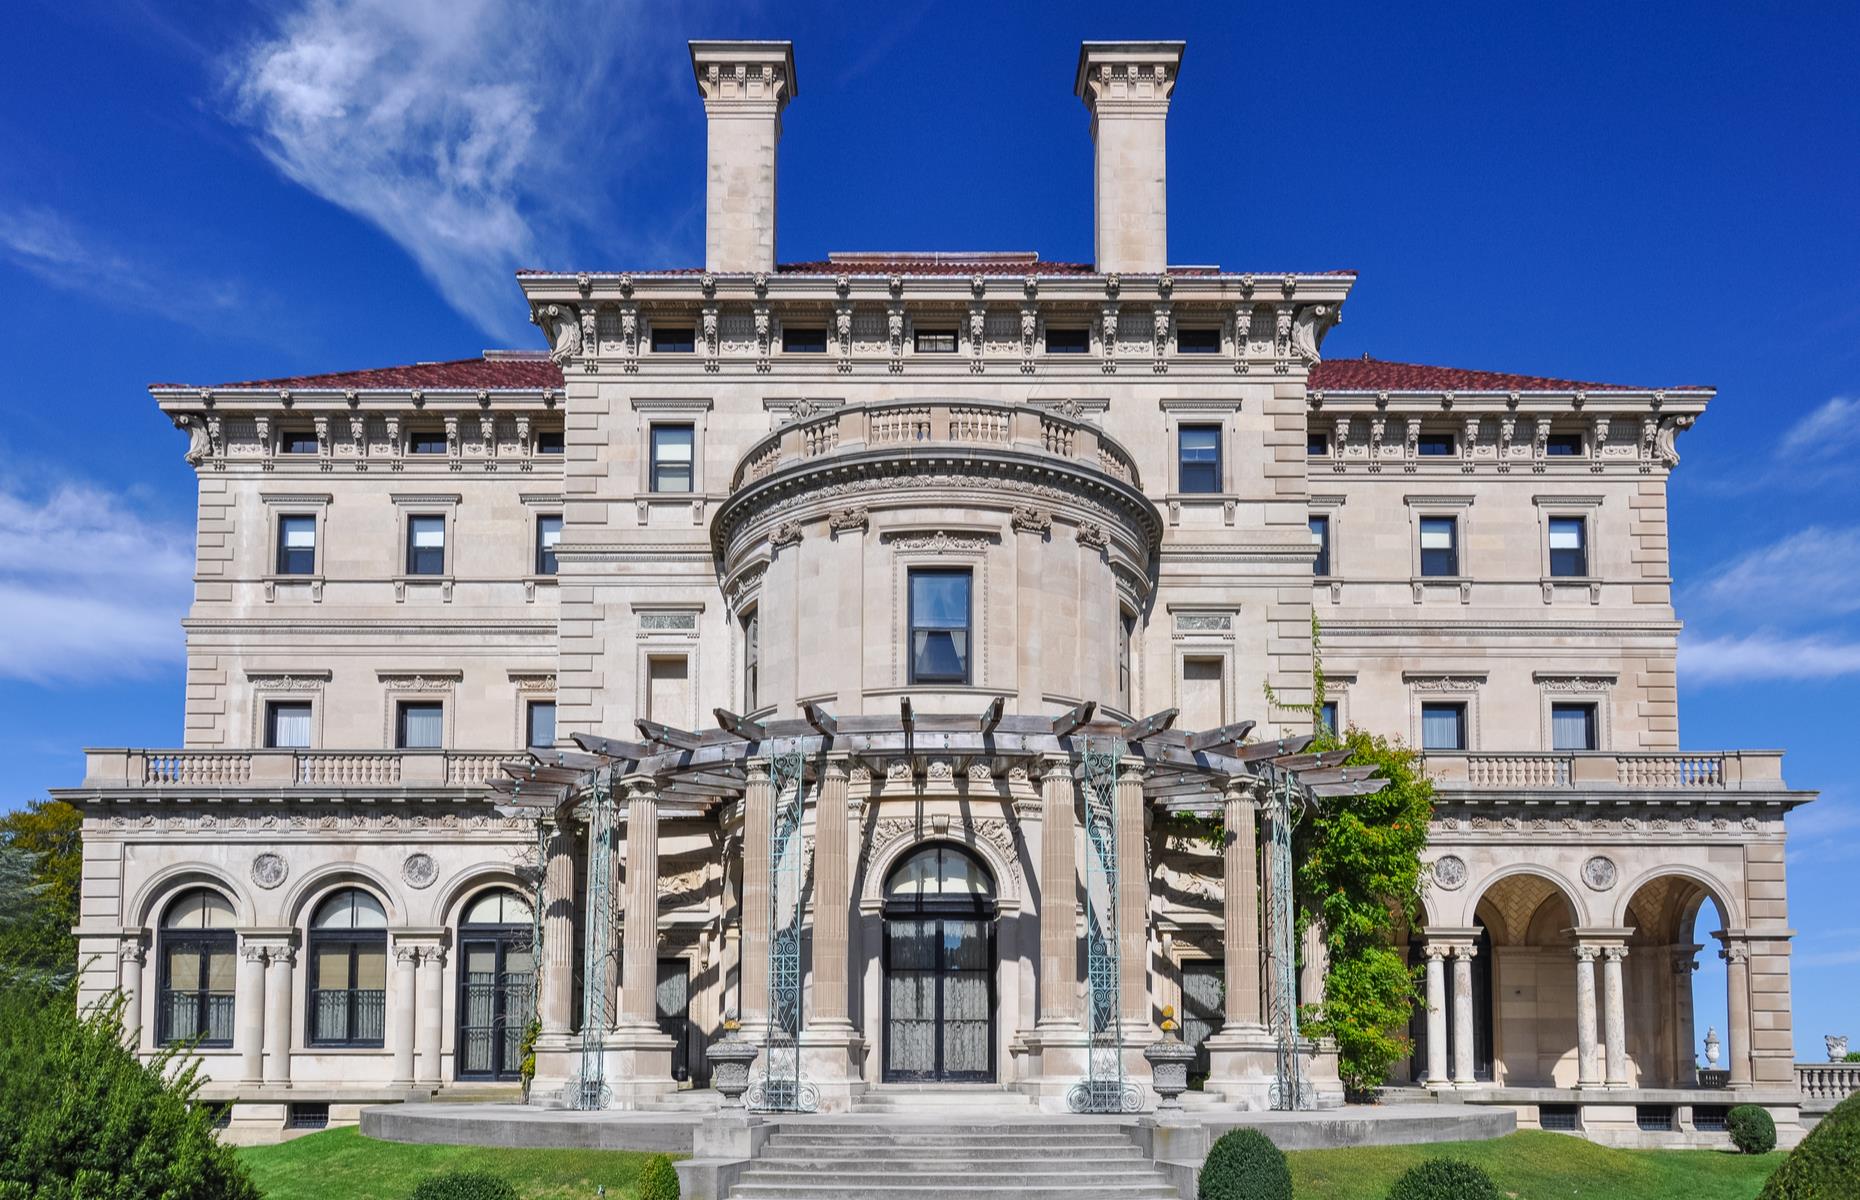 <p>The most impressive of Newport's series of mansions is <a href="https://www.newportmansions.org/explore/the-breakers">The Breakers</a>, an elegant Italian Renaissance-style building, completed in 1895 for Cornelius Vanderbilt II. And the highlight of Vanderbilt's 70-room summer home is the Great Hall, with its hanging chandeliers and carved ceilings soaring to 45 feet (14m). Various guided tours weave their way around the sumptuous property. </p>